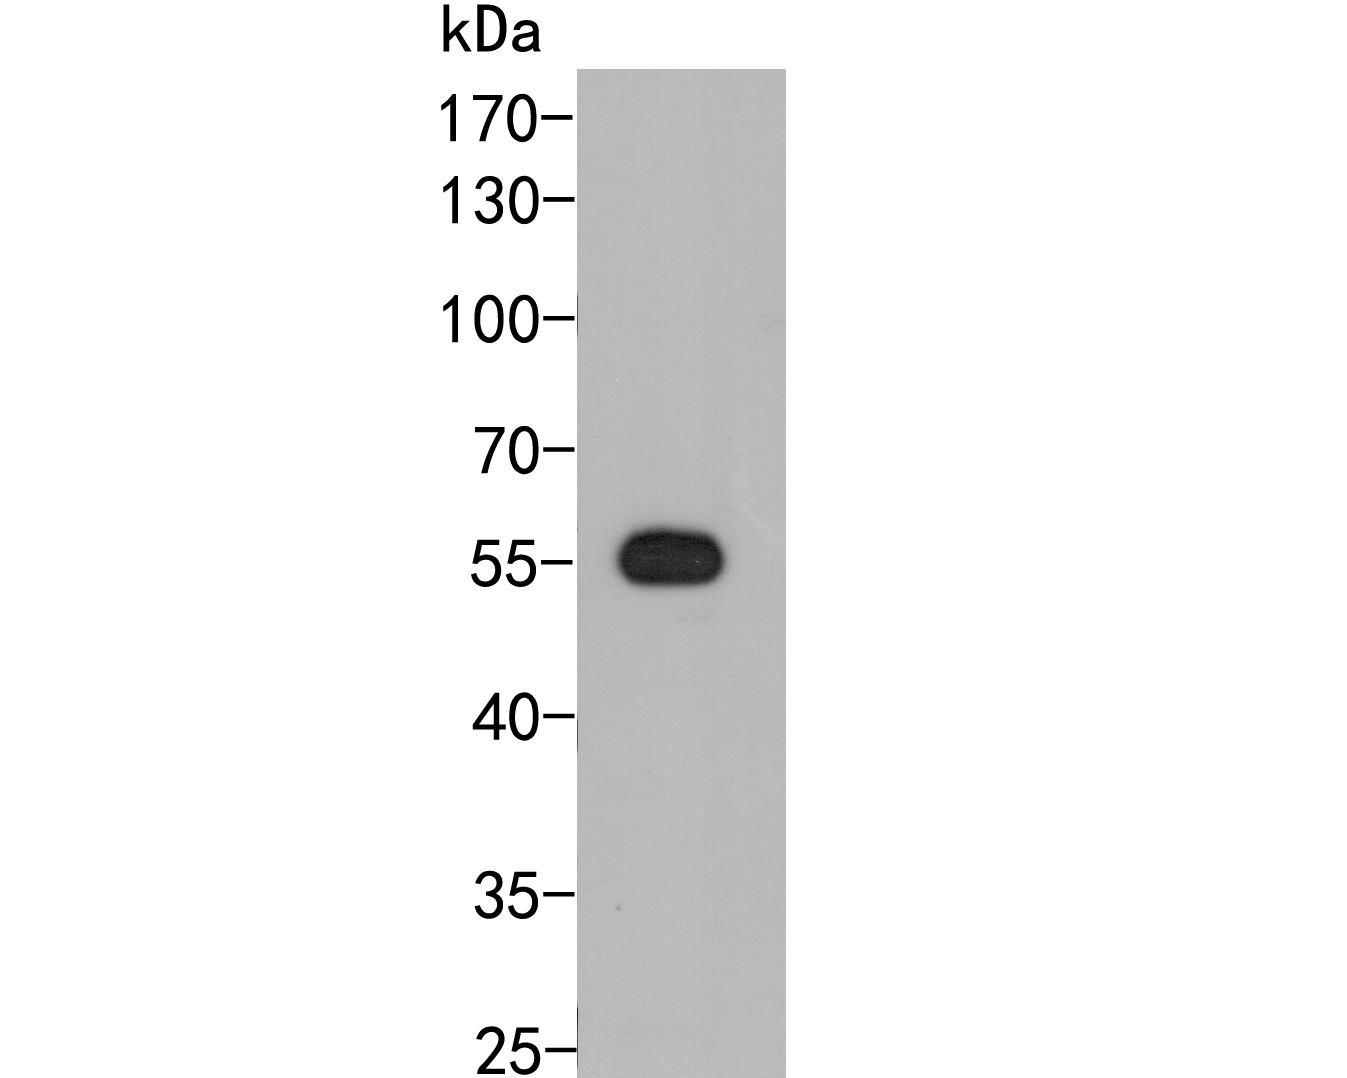 Fig1:; Western blot analysis of PHR2 on rice tissue lysate. Proteins were transferred to a PVDF membrane and blocked with 5% BSA in PBS for 1 hour at room temperature. The primary antibody ( 1/500) was used in 5% BSA at room temperature for 2 hours. Goat Anti-Rabbit IgG - HRP Secondary Antibody (HA1001) at 1:5,000 dilution was used for 1 hour at room temperature.